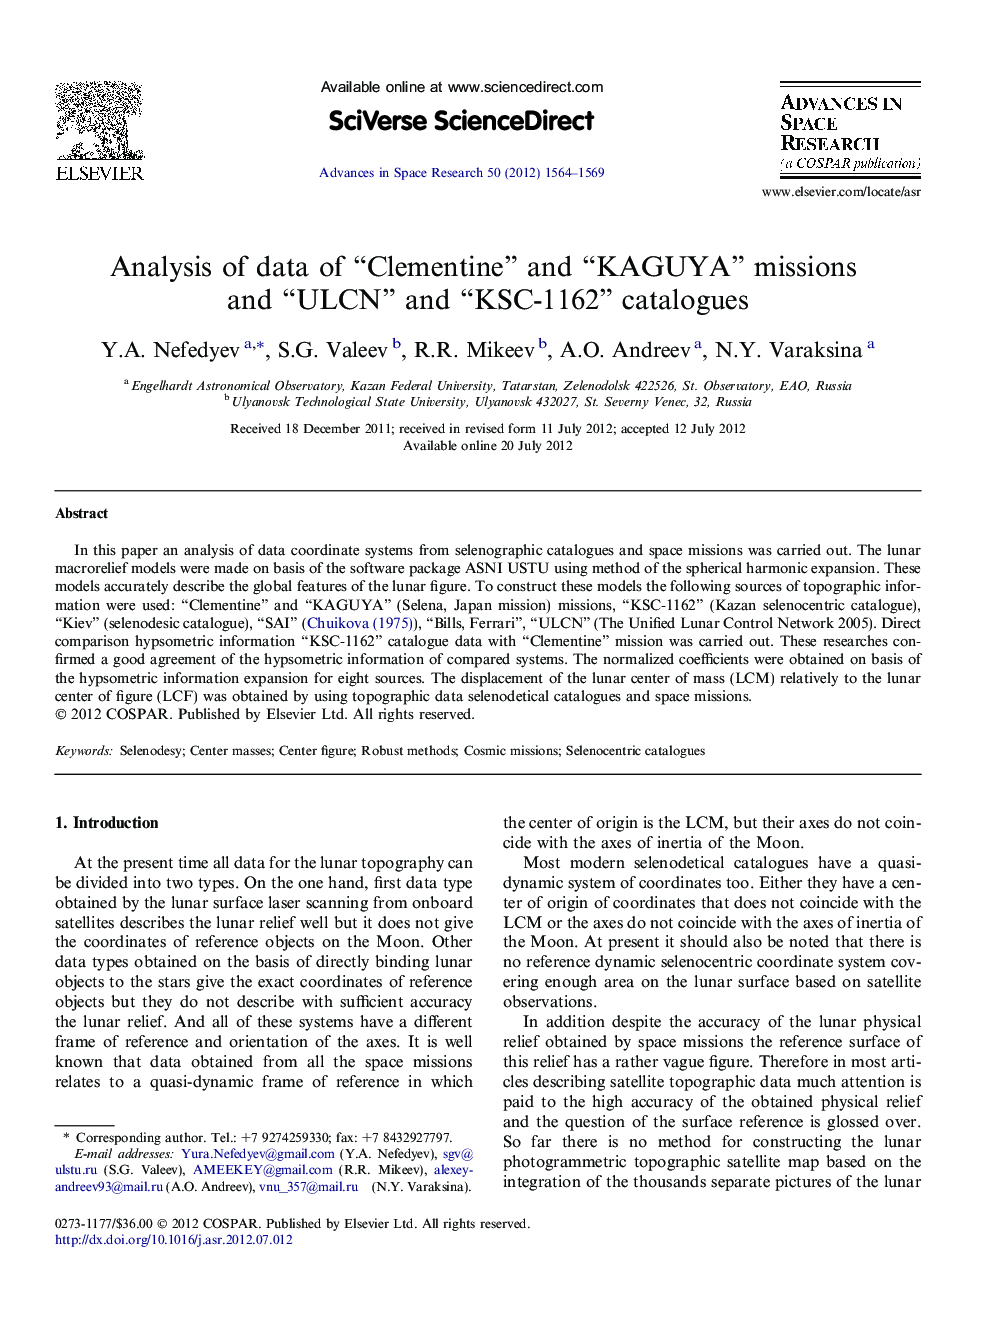 Analysis of data of “Clementine” and “KAGUYA” missions and “ULCN” and “KSC-1162” catalogues